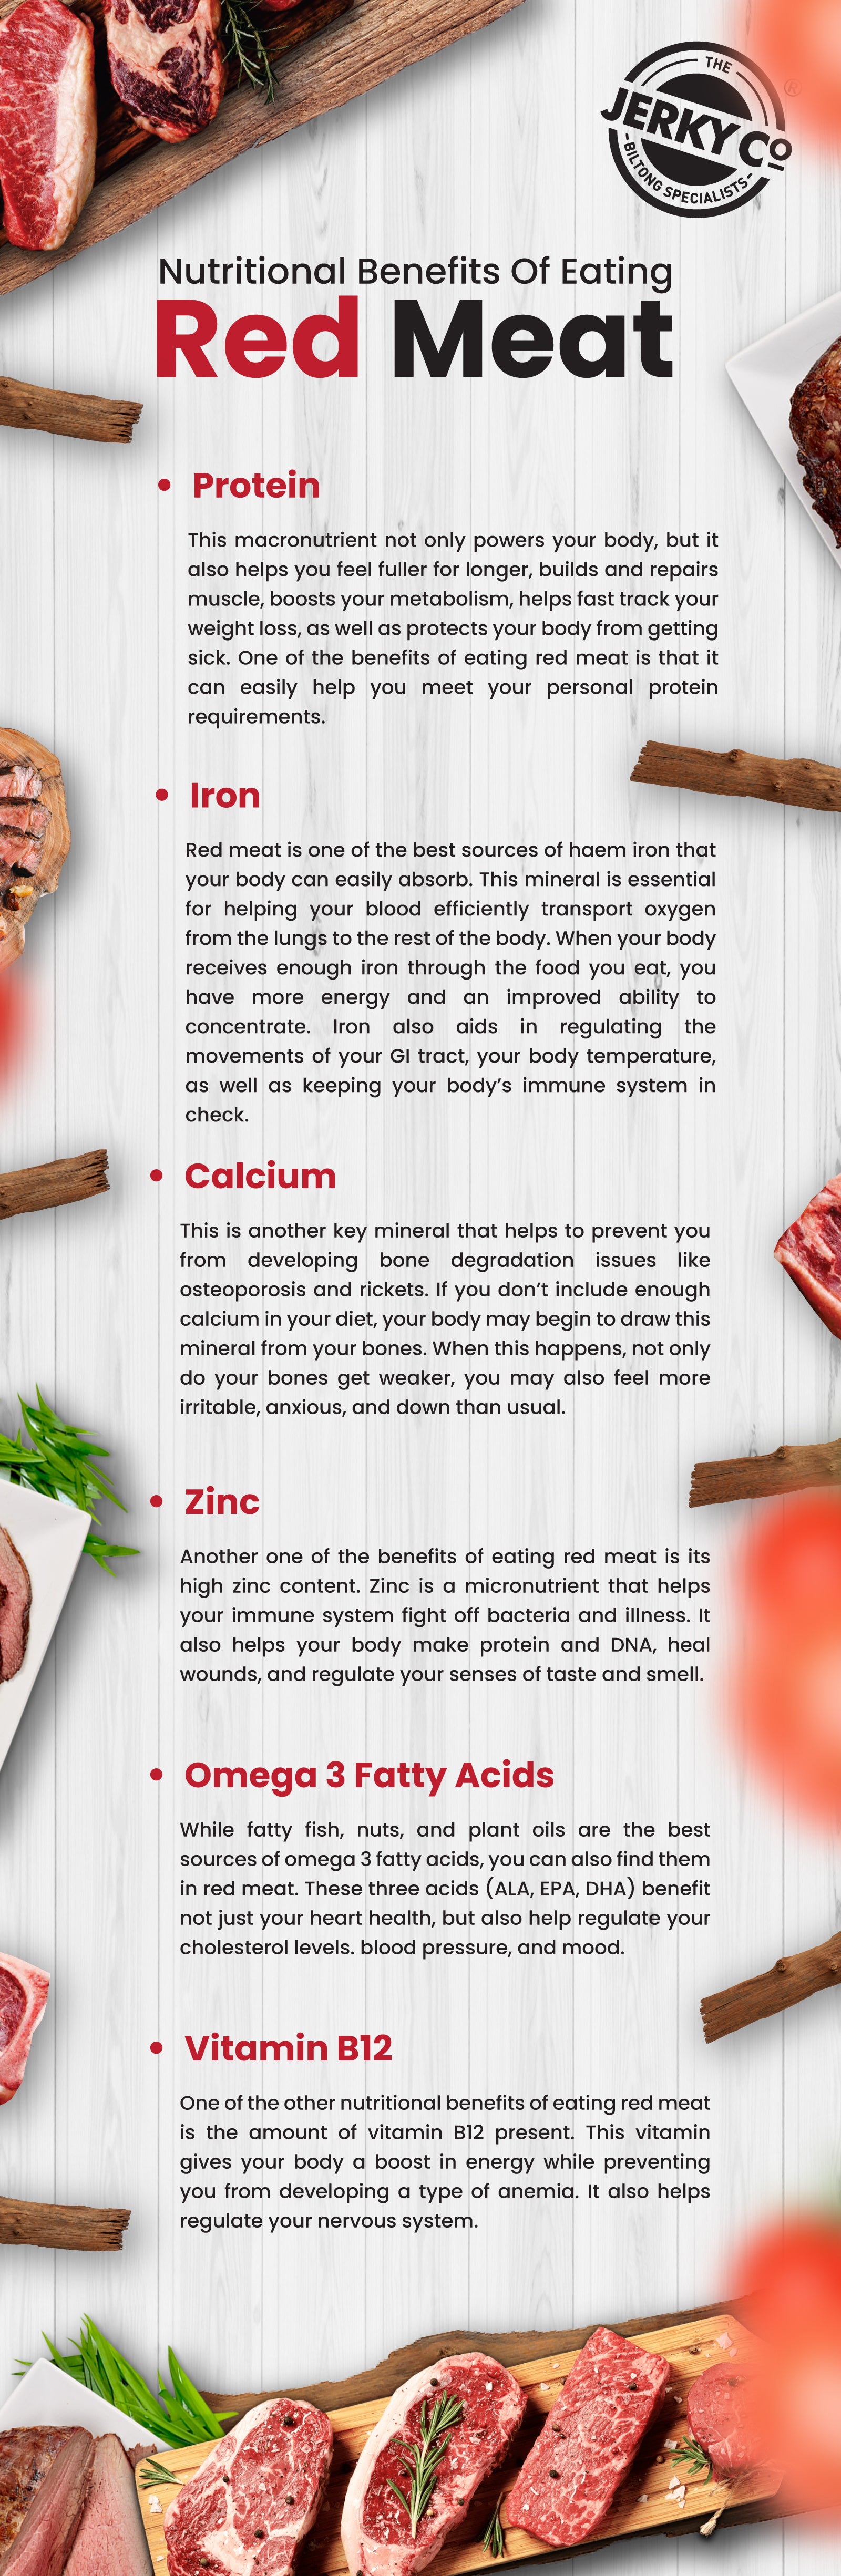 Nutritional Benefits Of Eating Red Meat